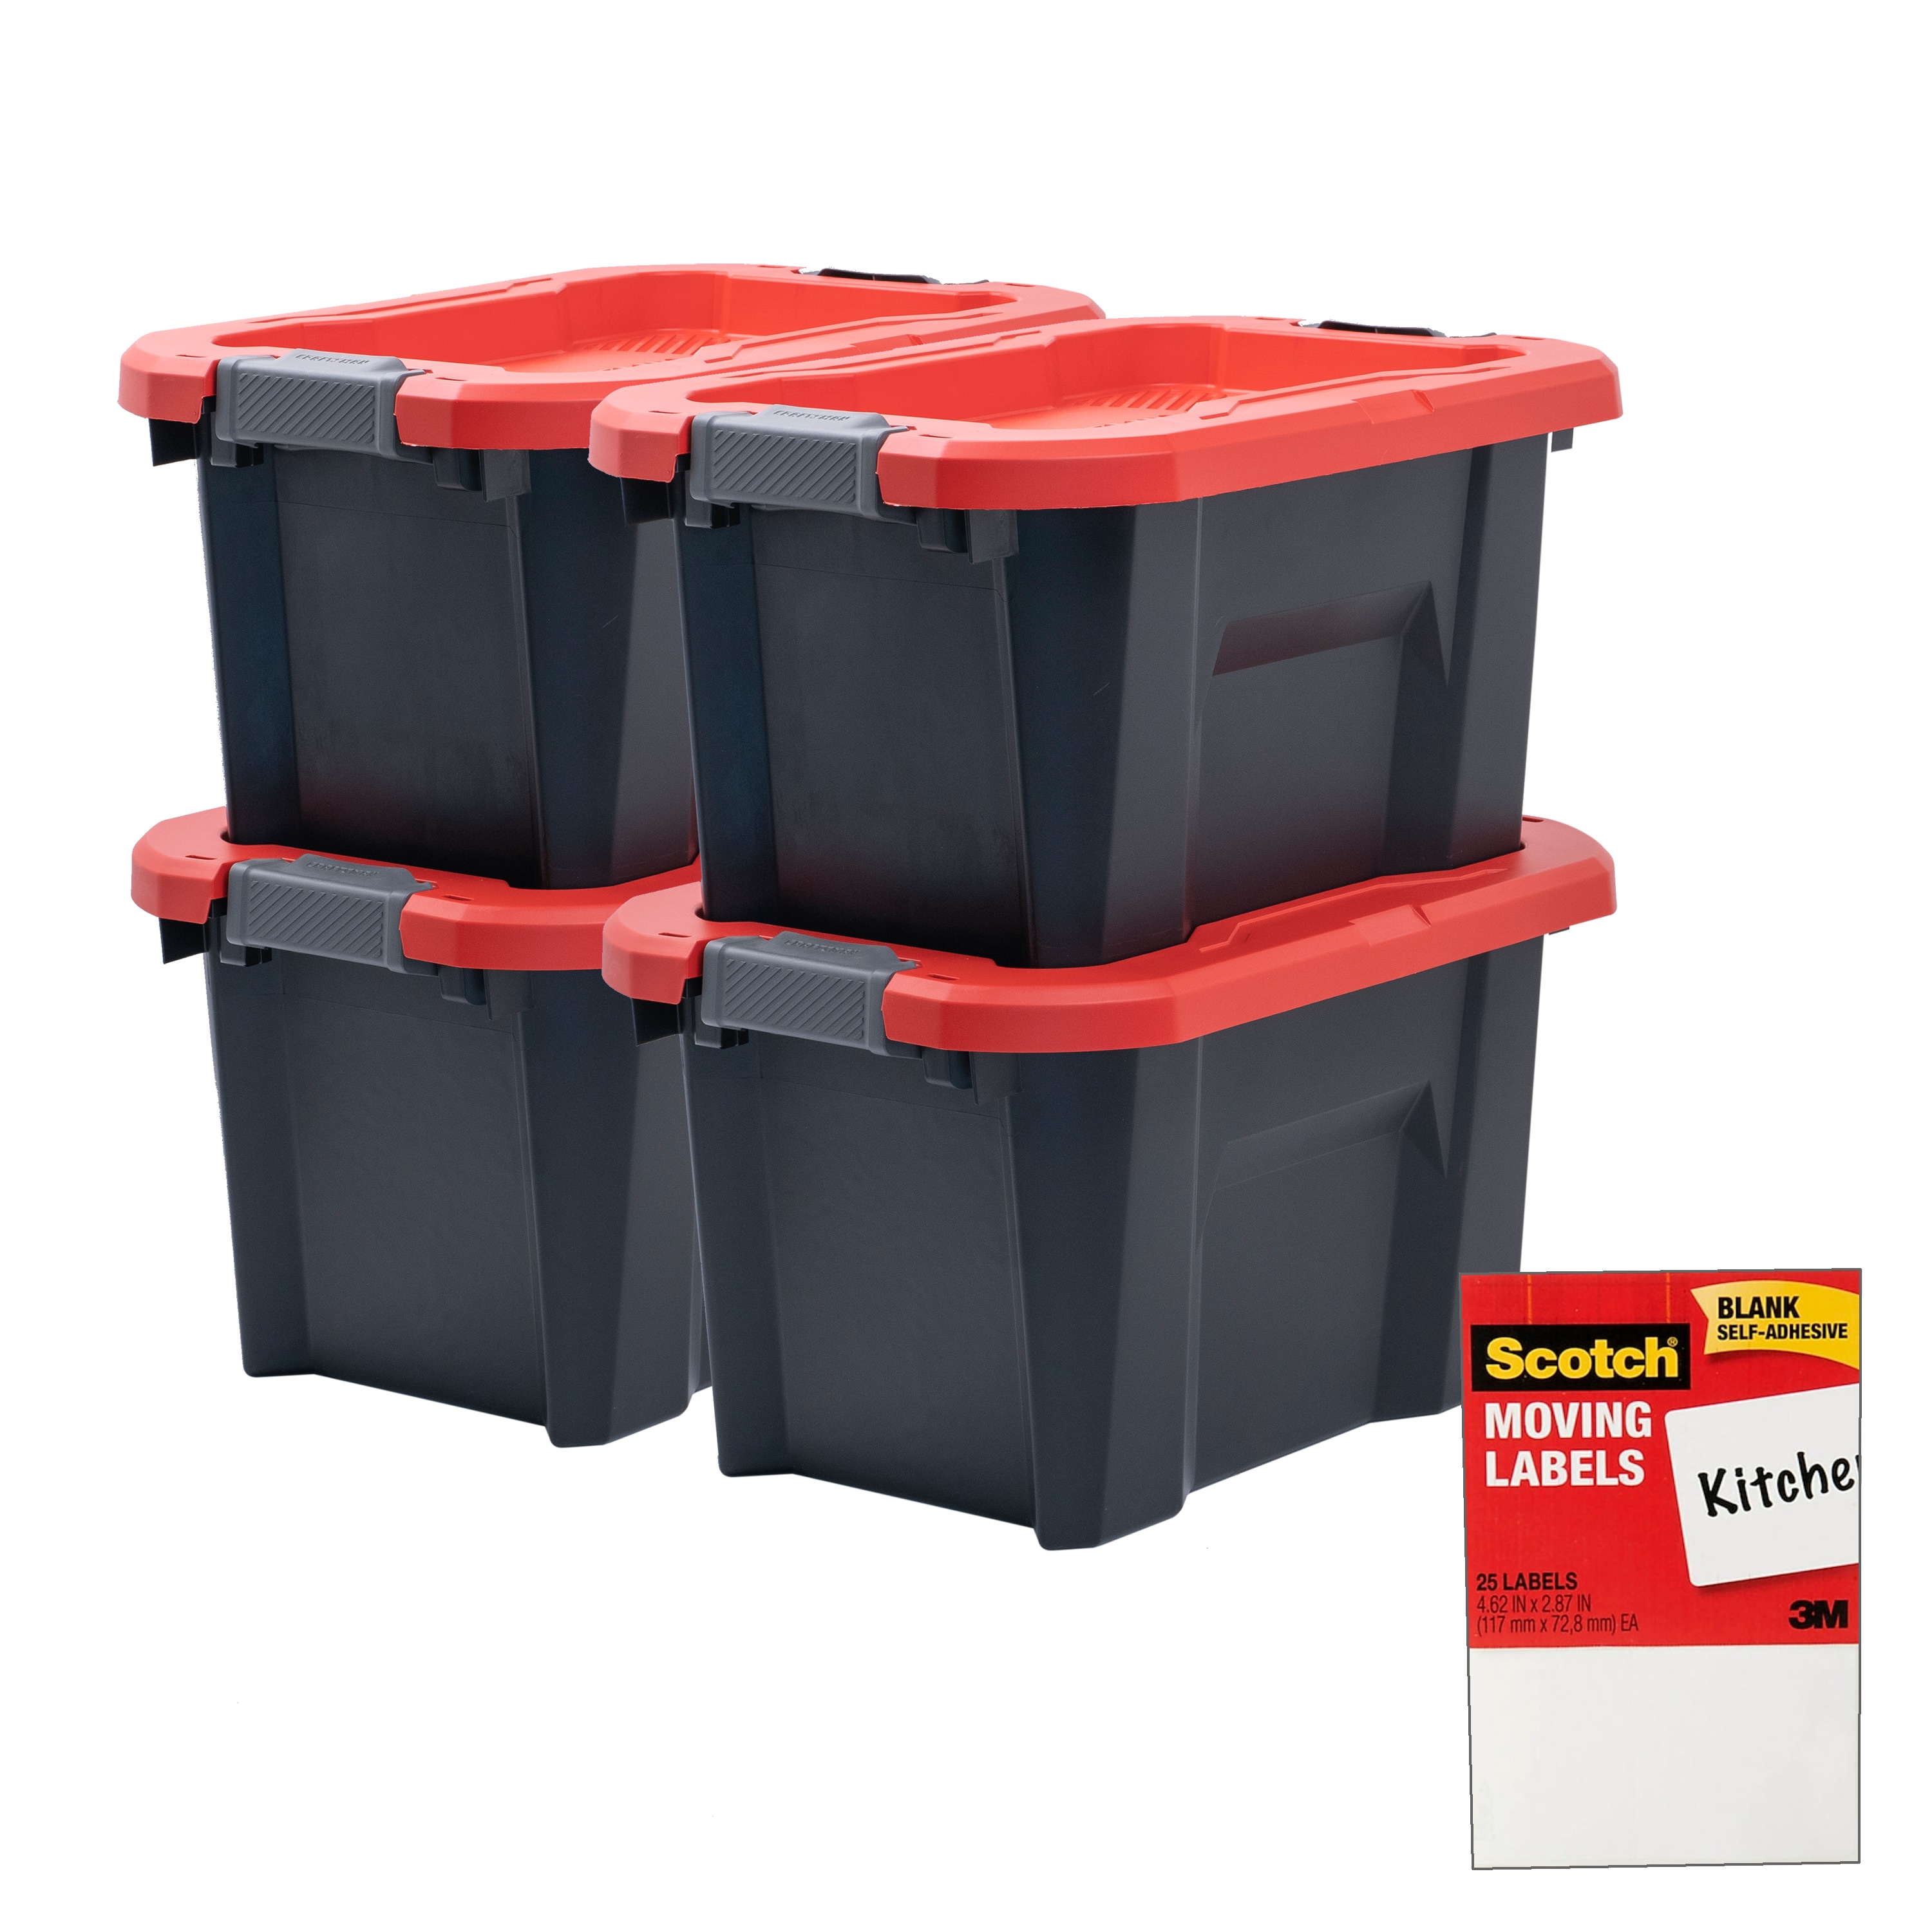 CX CRAFTSMAN, 30-Gallon Highly Durable Storage Bin & Dual Latching Lid,  (16.1”H x 21.7”W x 32.4”D), Versatile Stacking Tote and Weather-Resistant